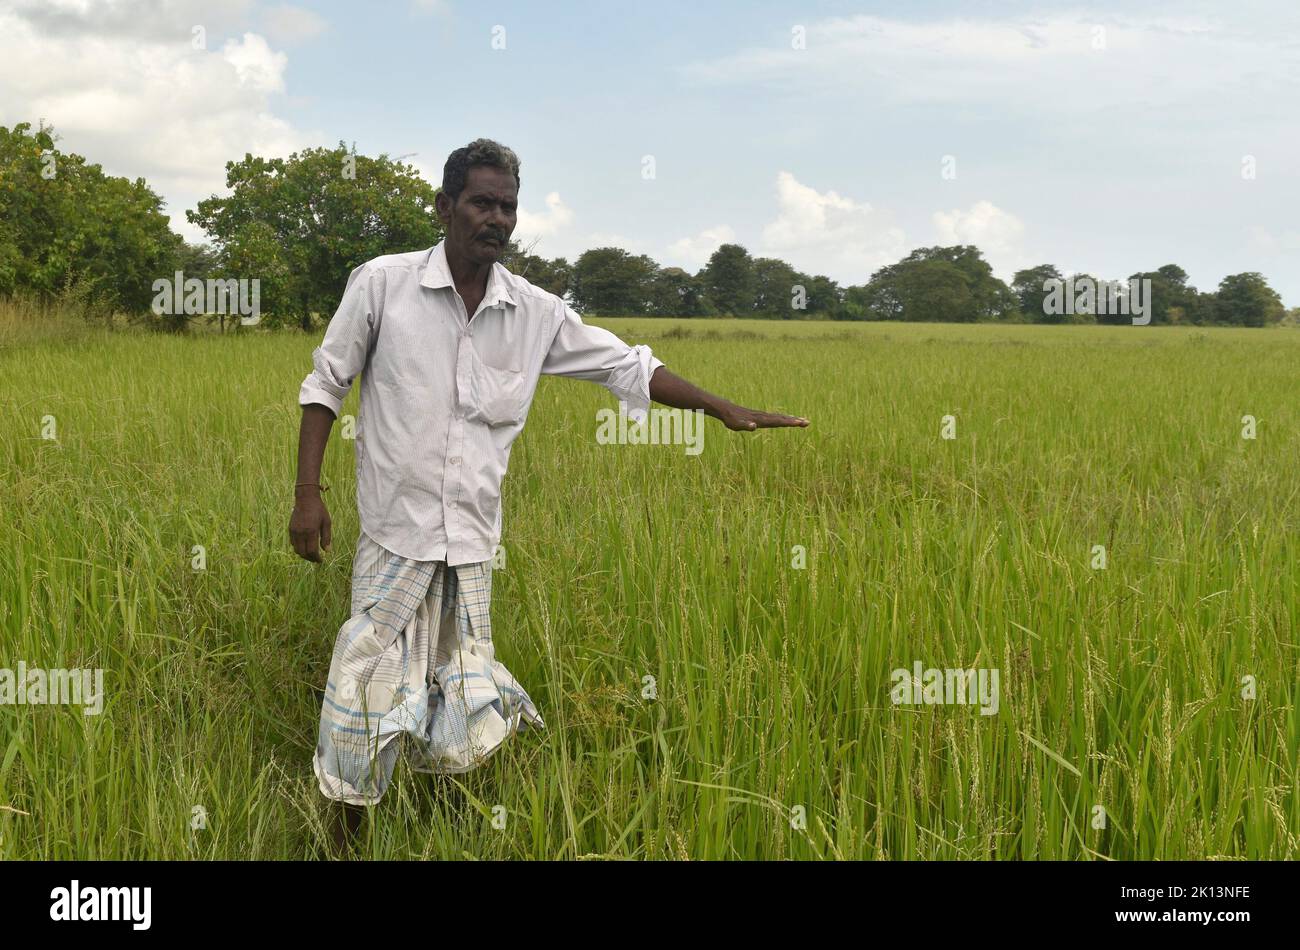 Kilinochchi, Sri Lanka. 28th July, 2022. Shadagopalan Chandrasekaran stands in his rice field and shows how high the plants should actually have grown at this point. Sri Lanka is experiencing its worst economic crisis in decades. A temporary ban on the import of artificial fertilizers last year has had far-reaching consequences for food production in the island nation. (to dpa 'Sri Lanka faces food crisis - farmers fight for survival') Credit: S. Rubatheesan/dpa/Alamy Live News Stock Photo